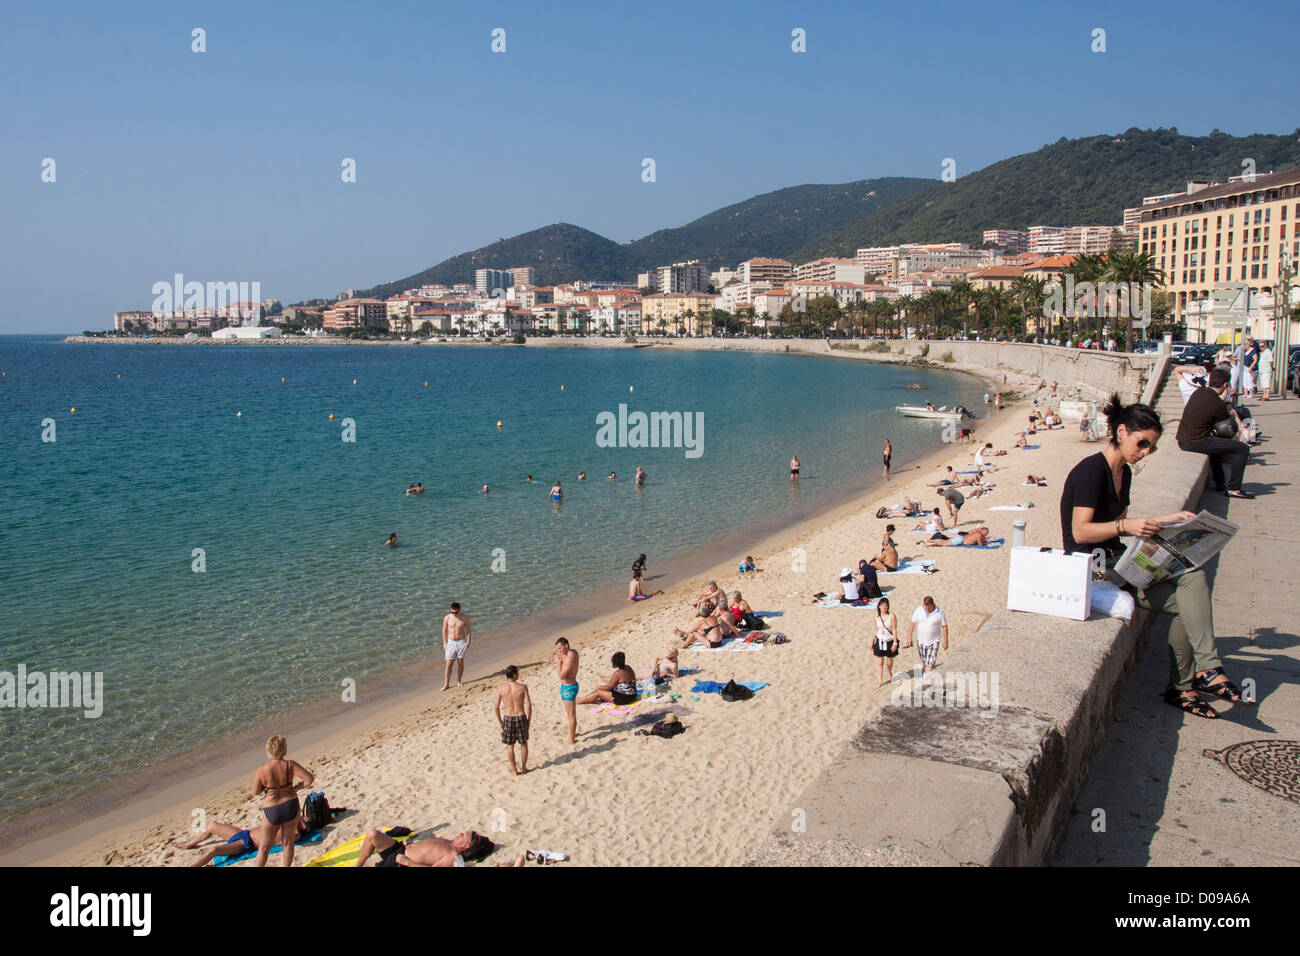 BATHERS AND STROLLERS ON THE BEACH OF AJACCIO SOUTHERN CORSICA (2A) FRANCE Stock Photo